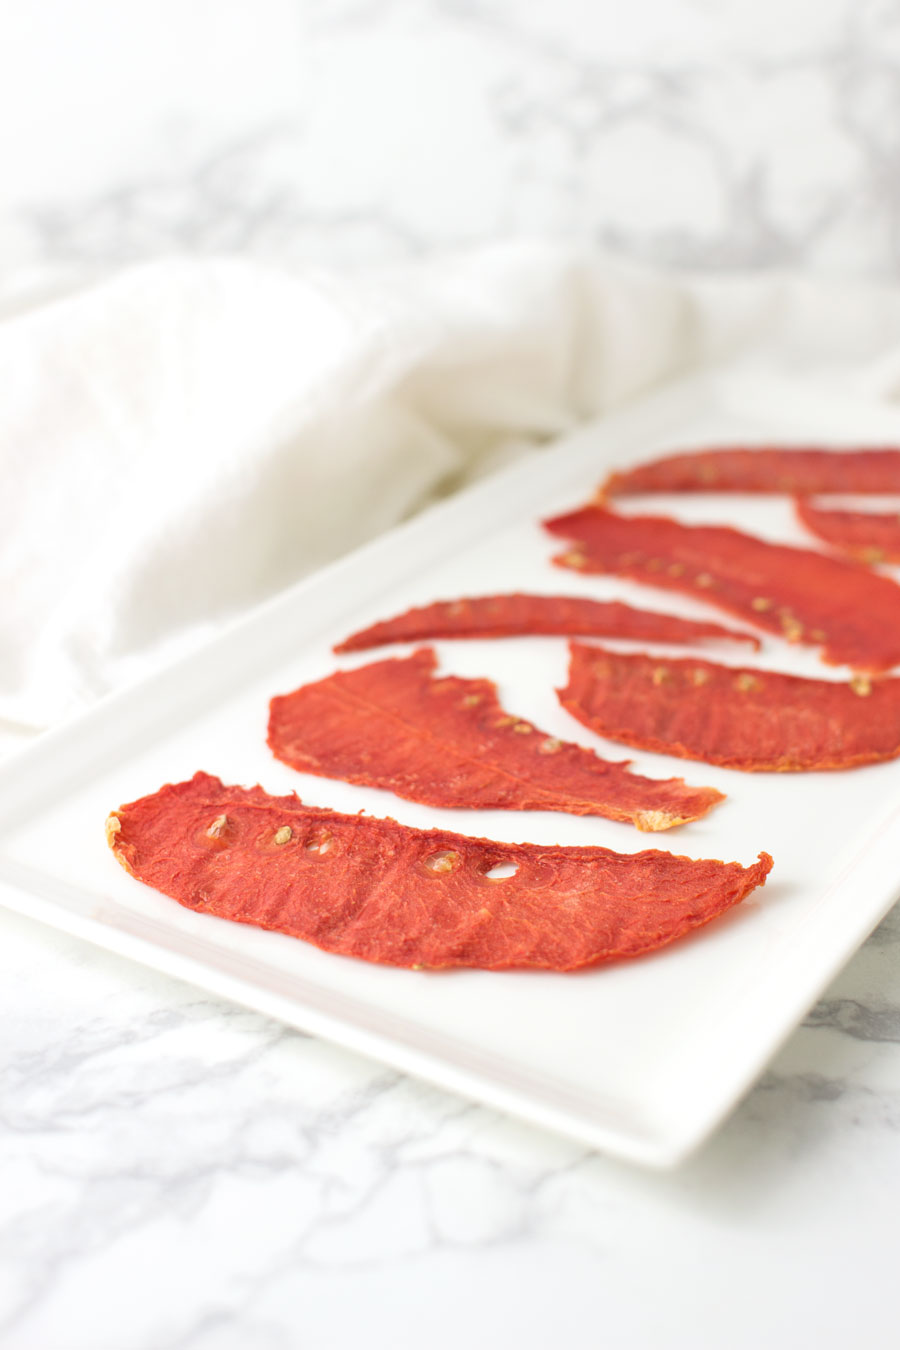 Candied Watermelon recipe from acleanplate.com #paleo #aip #glutenfree